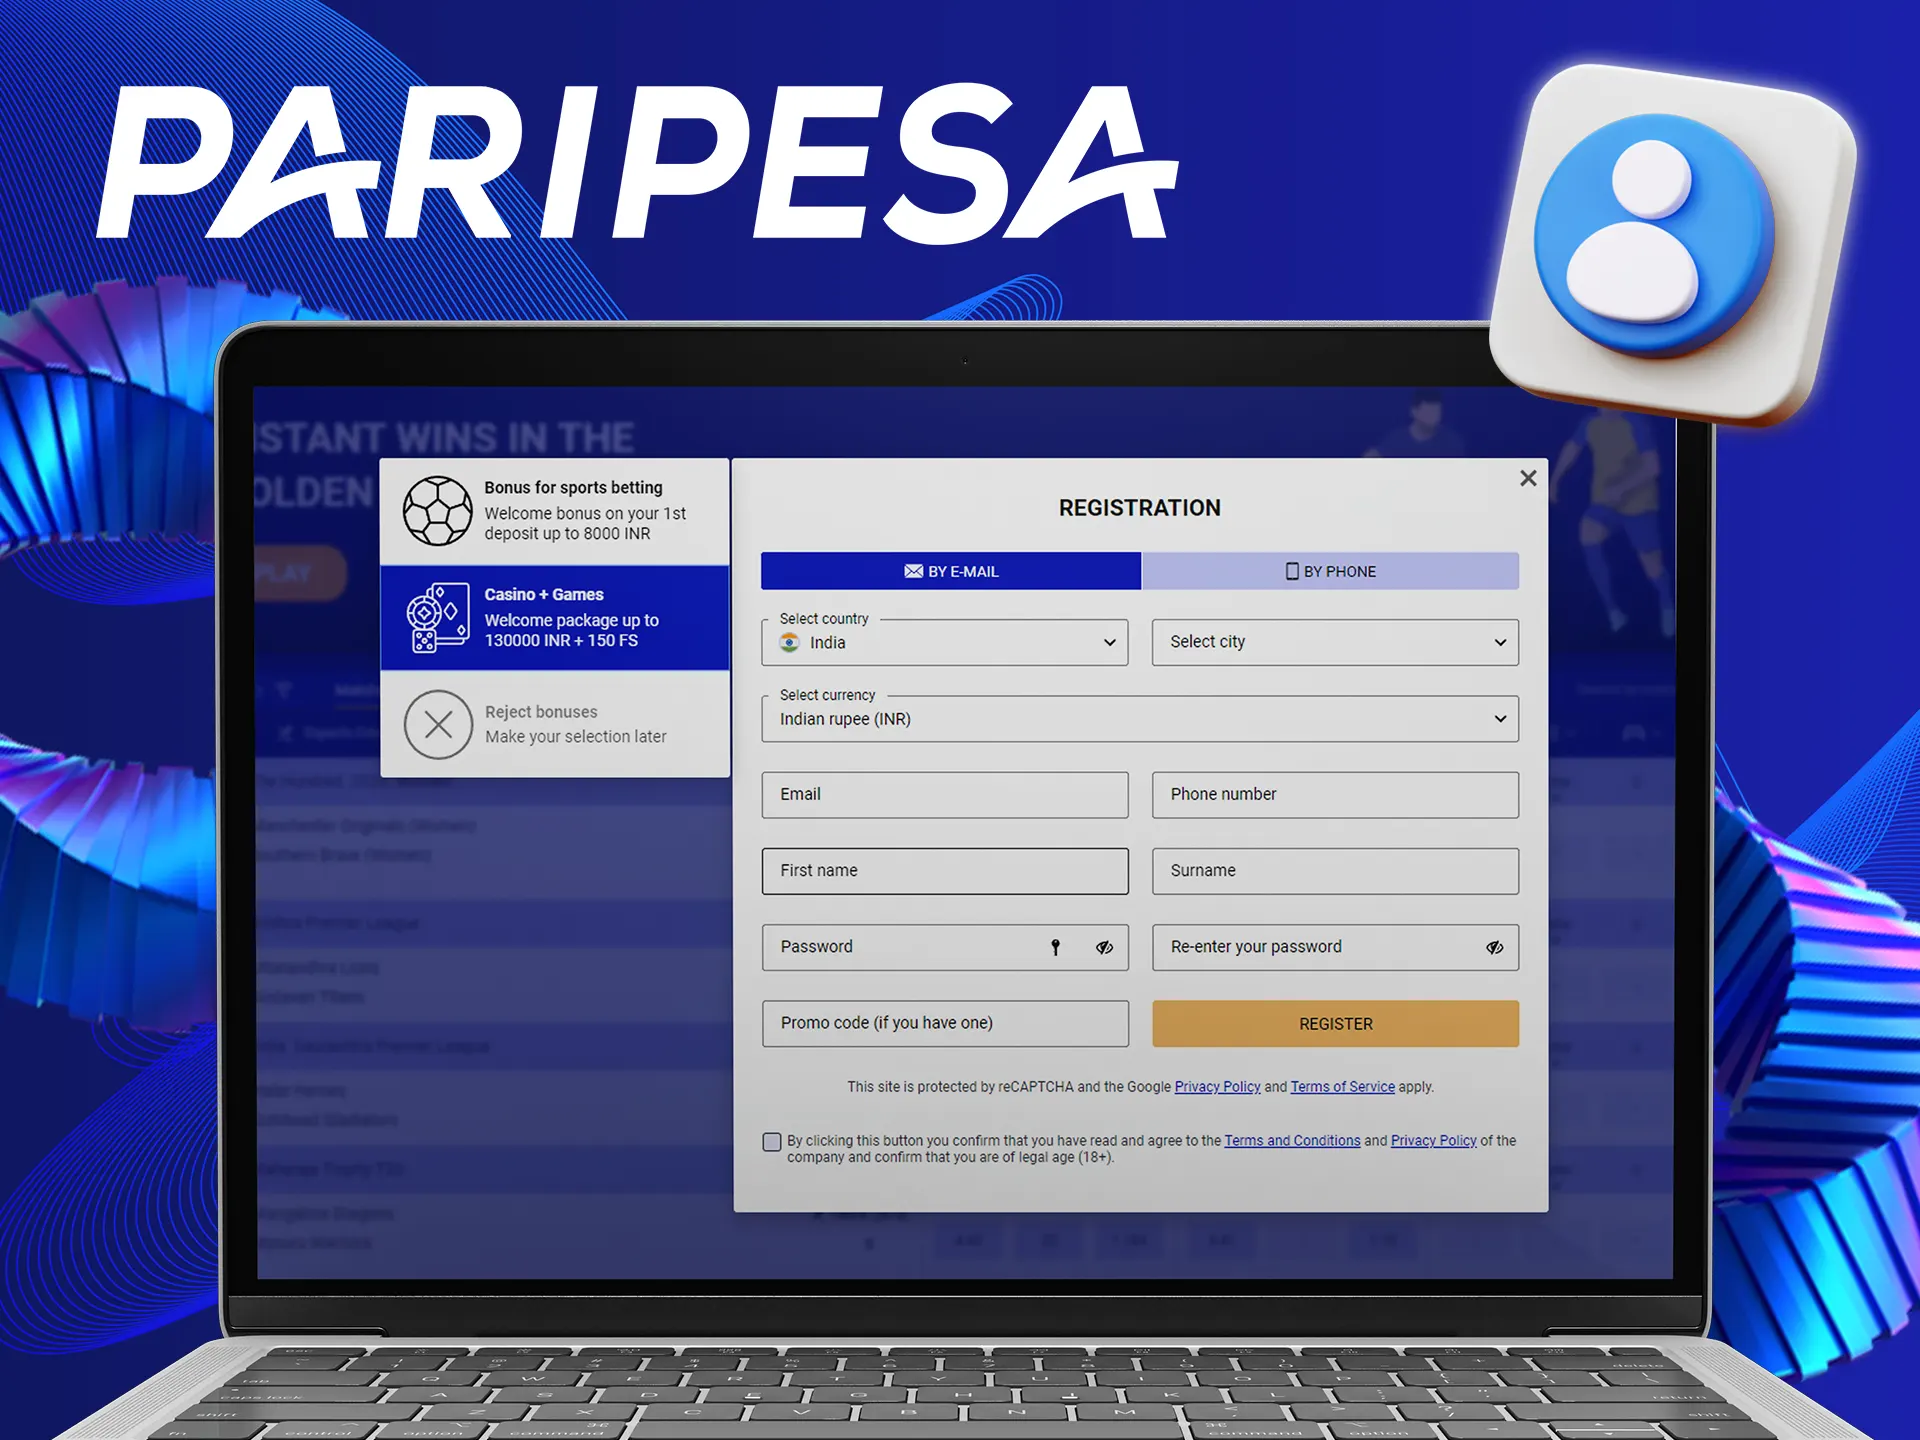 Fill in all of the required fields for making a new Paripesa account.